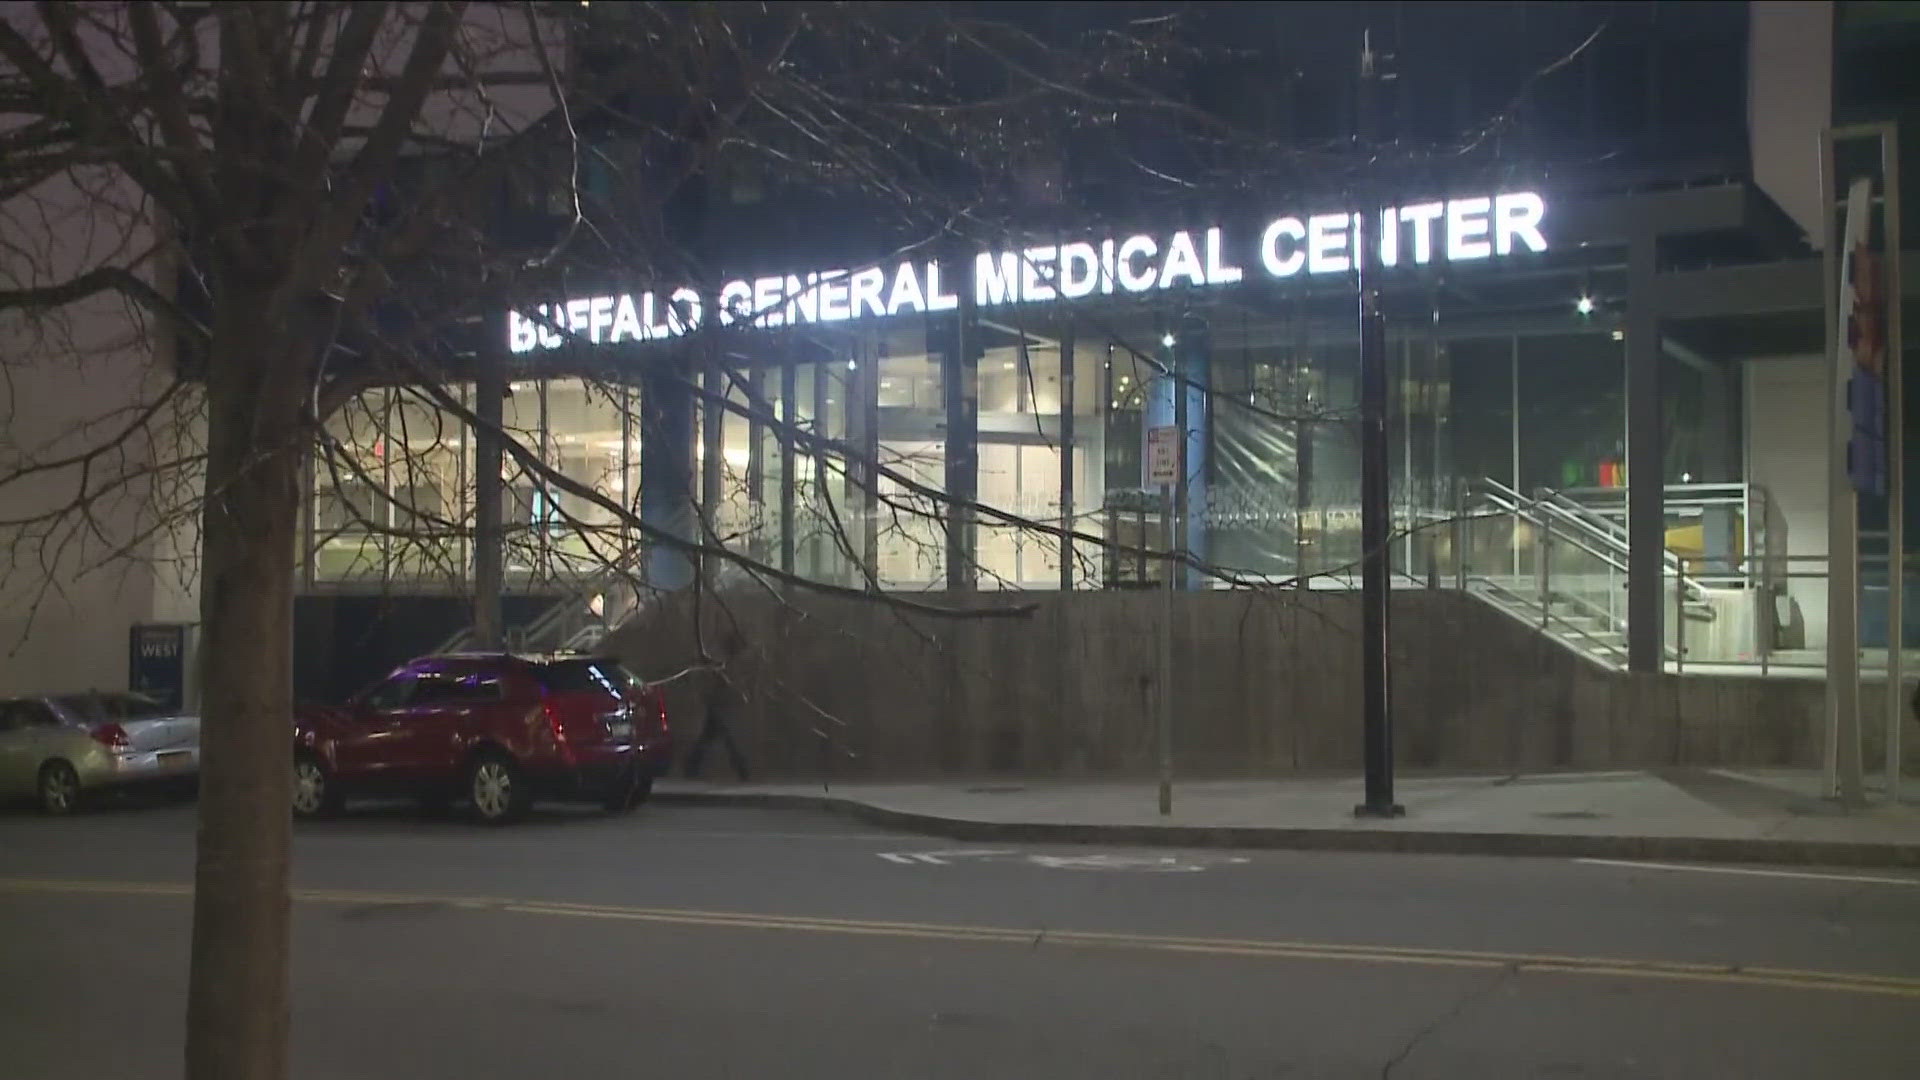 A 31-year-old from Corfu has been arrested in connection to a bomb threat made at Buffalo General Hospital in March.